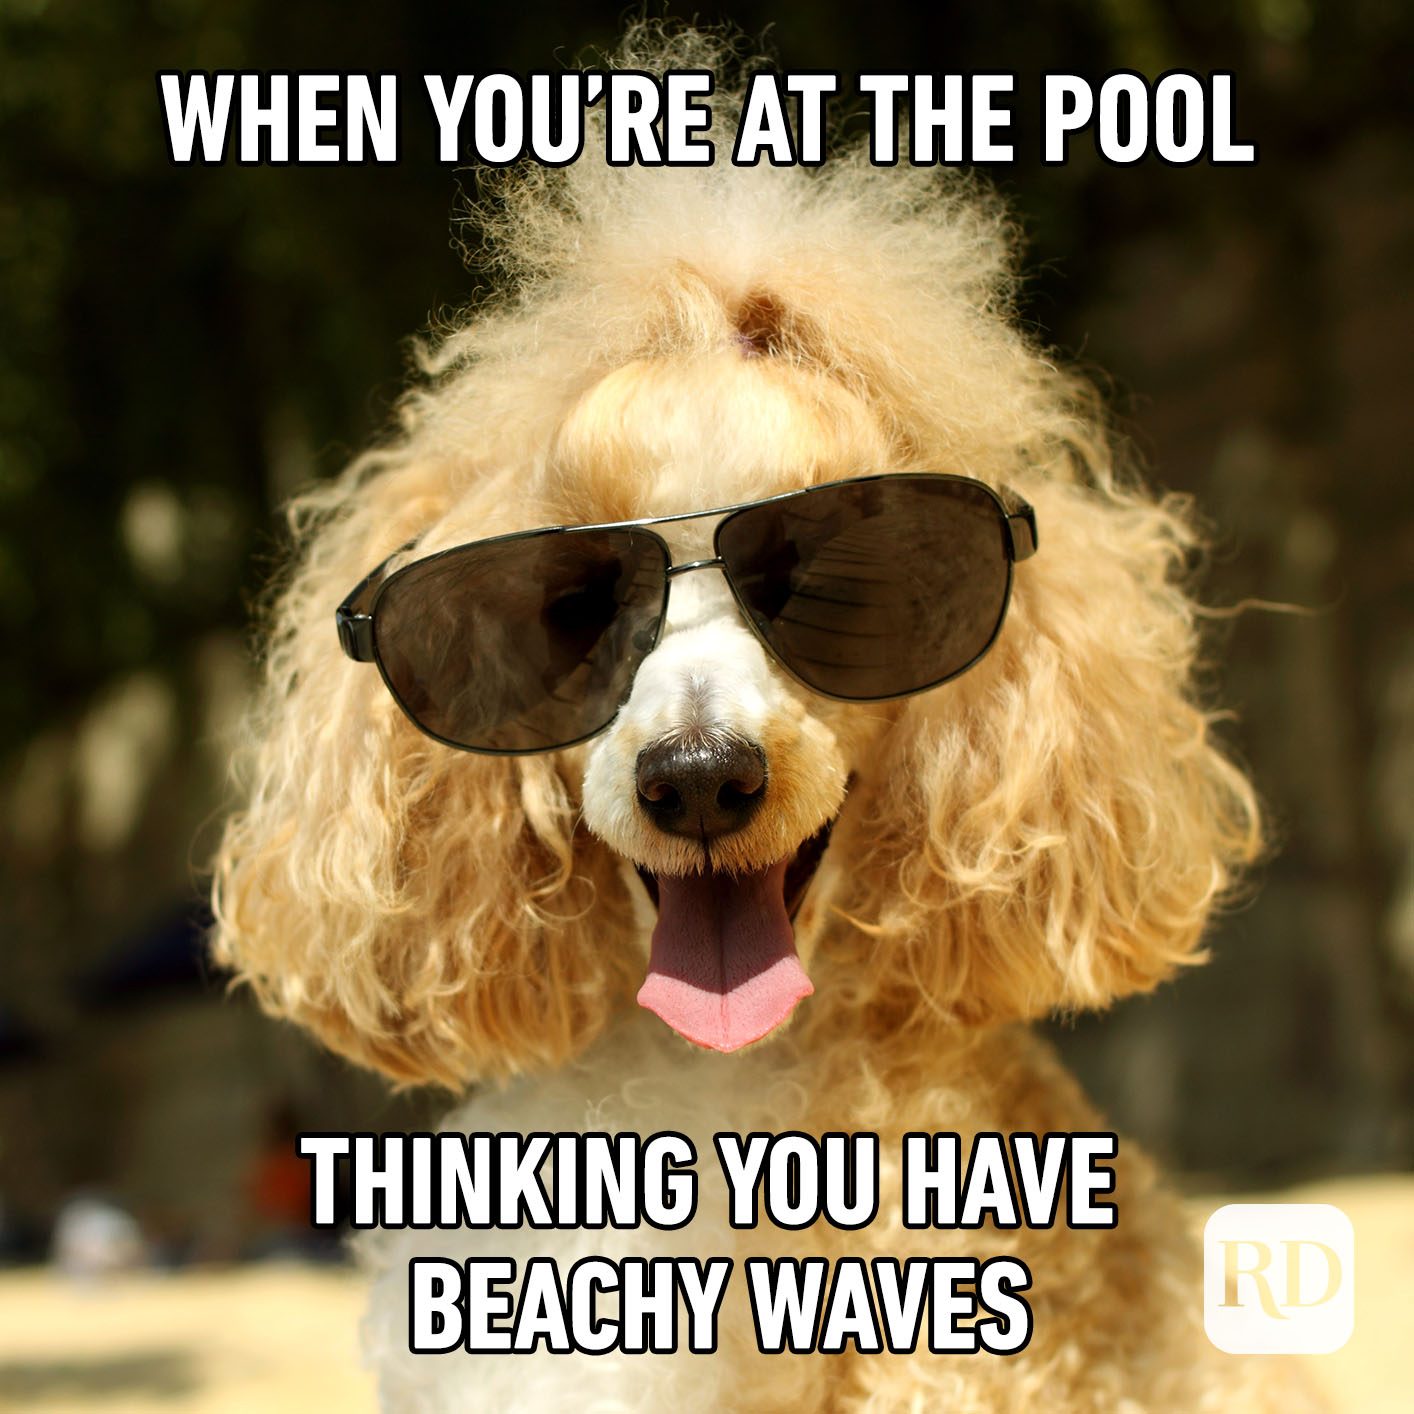 Meme text: When you're at the pool thinking you have beachy waves